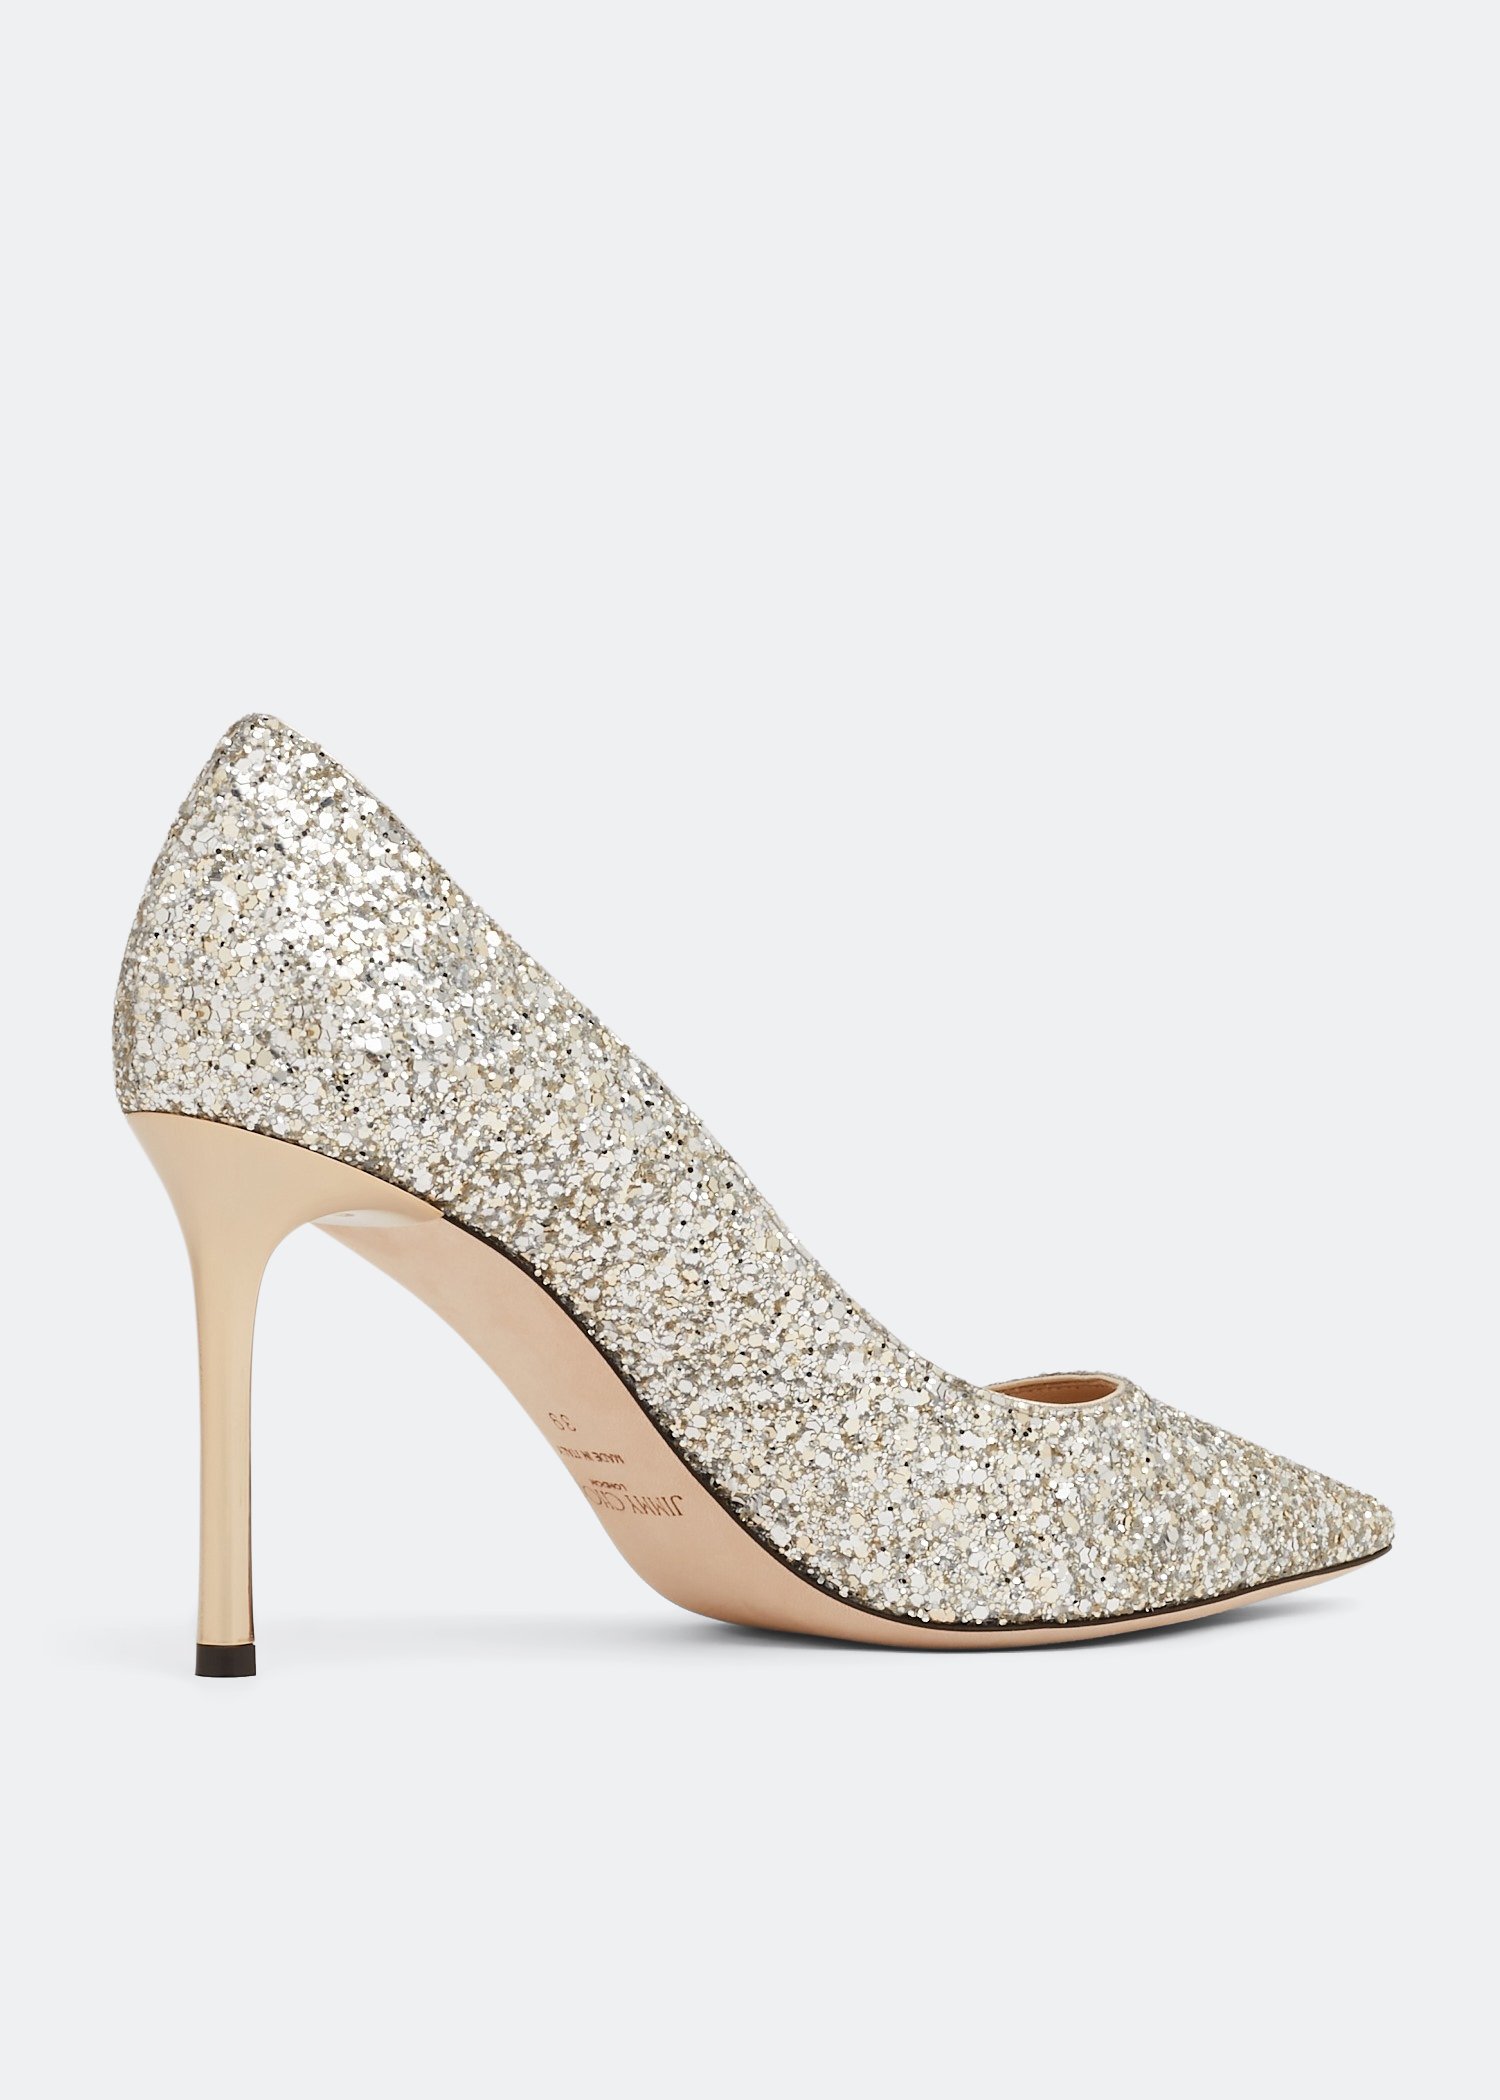 Jimmy Choo Romy 85 pumps for Women - Gold in UAE | Level Shoes